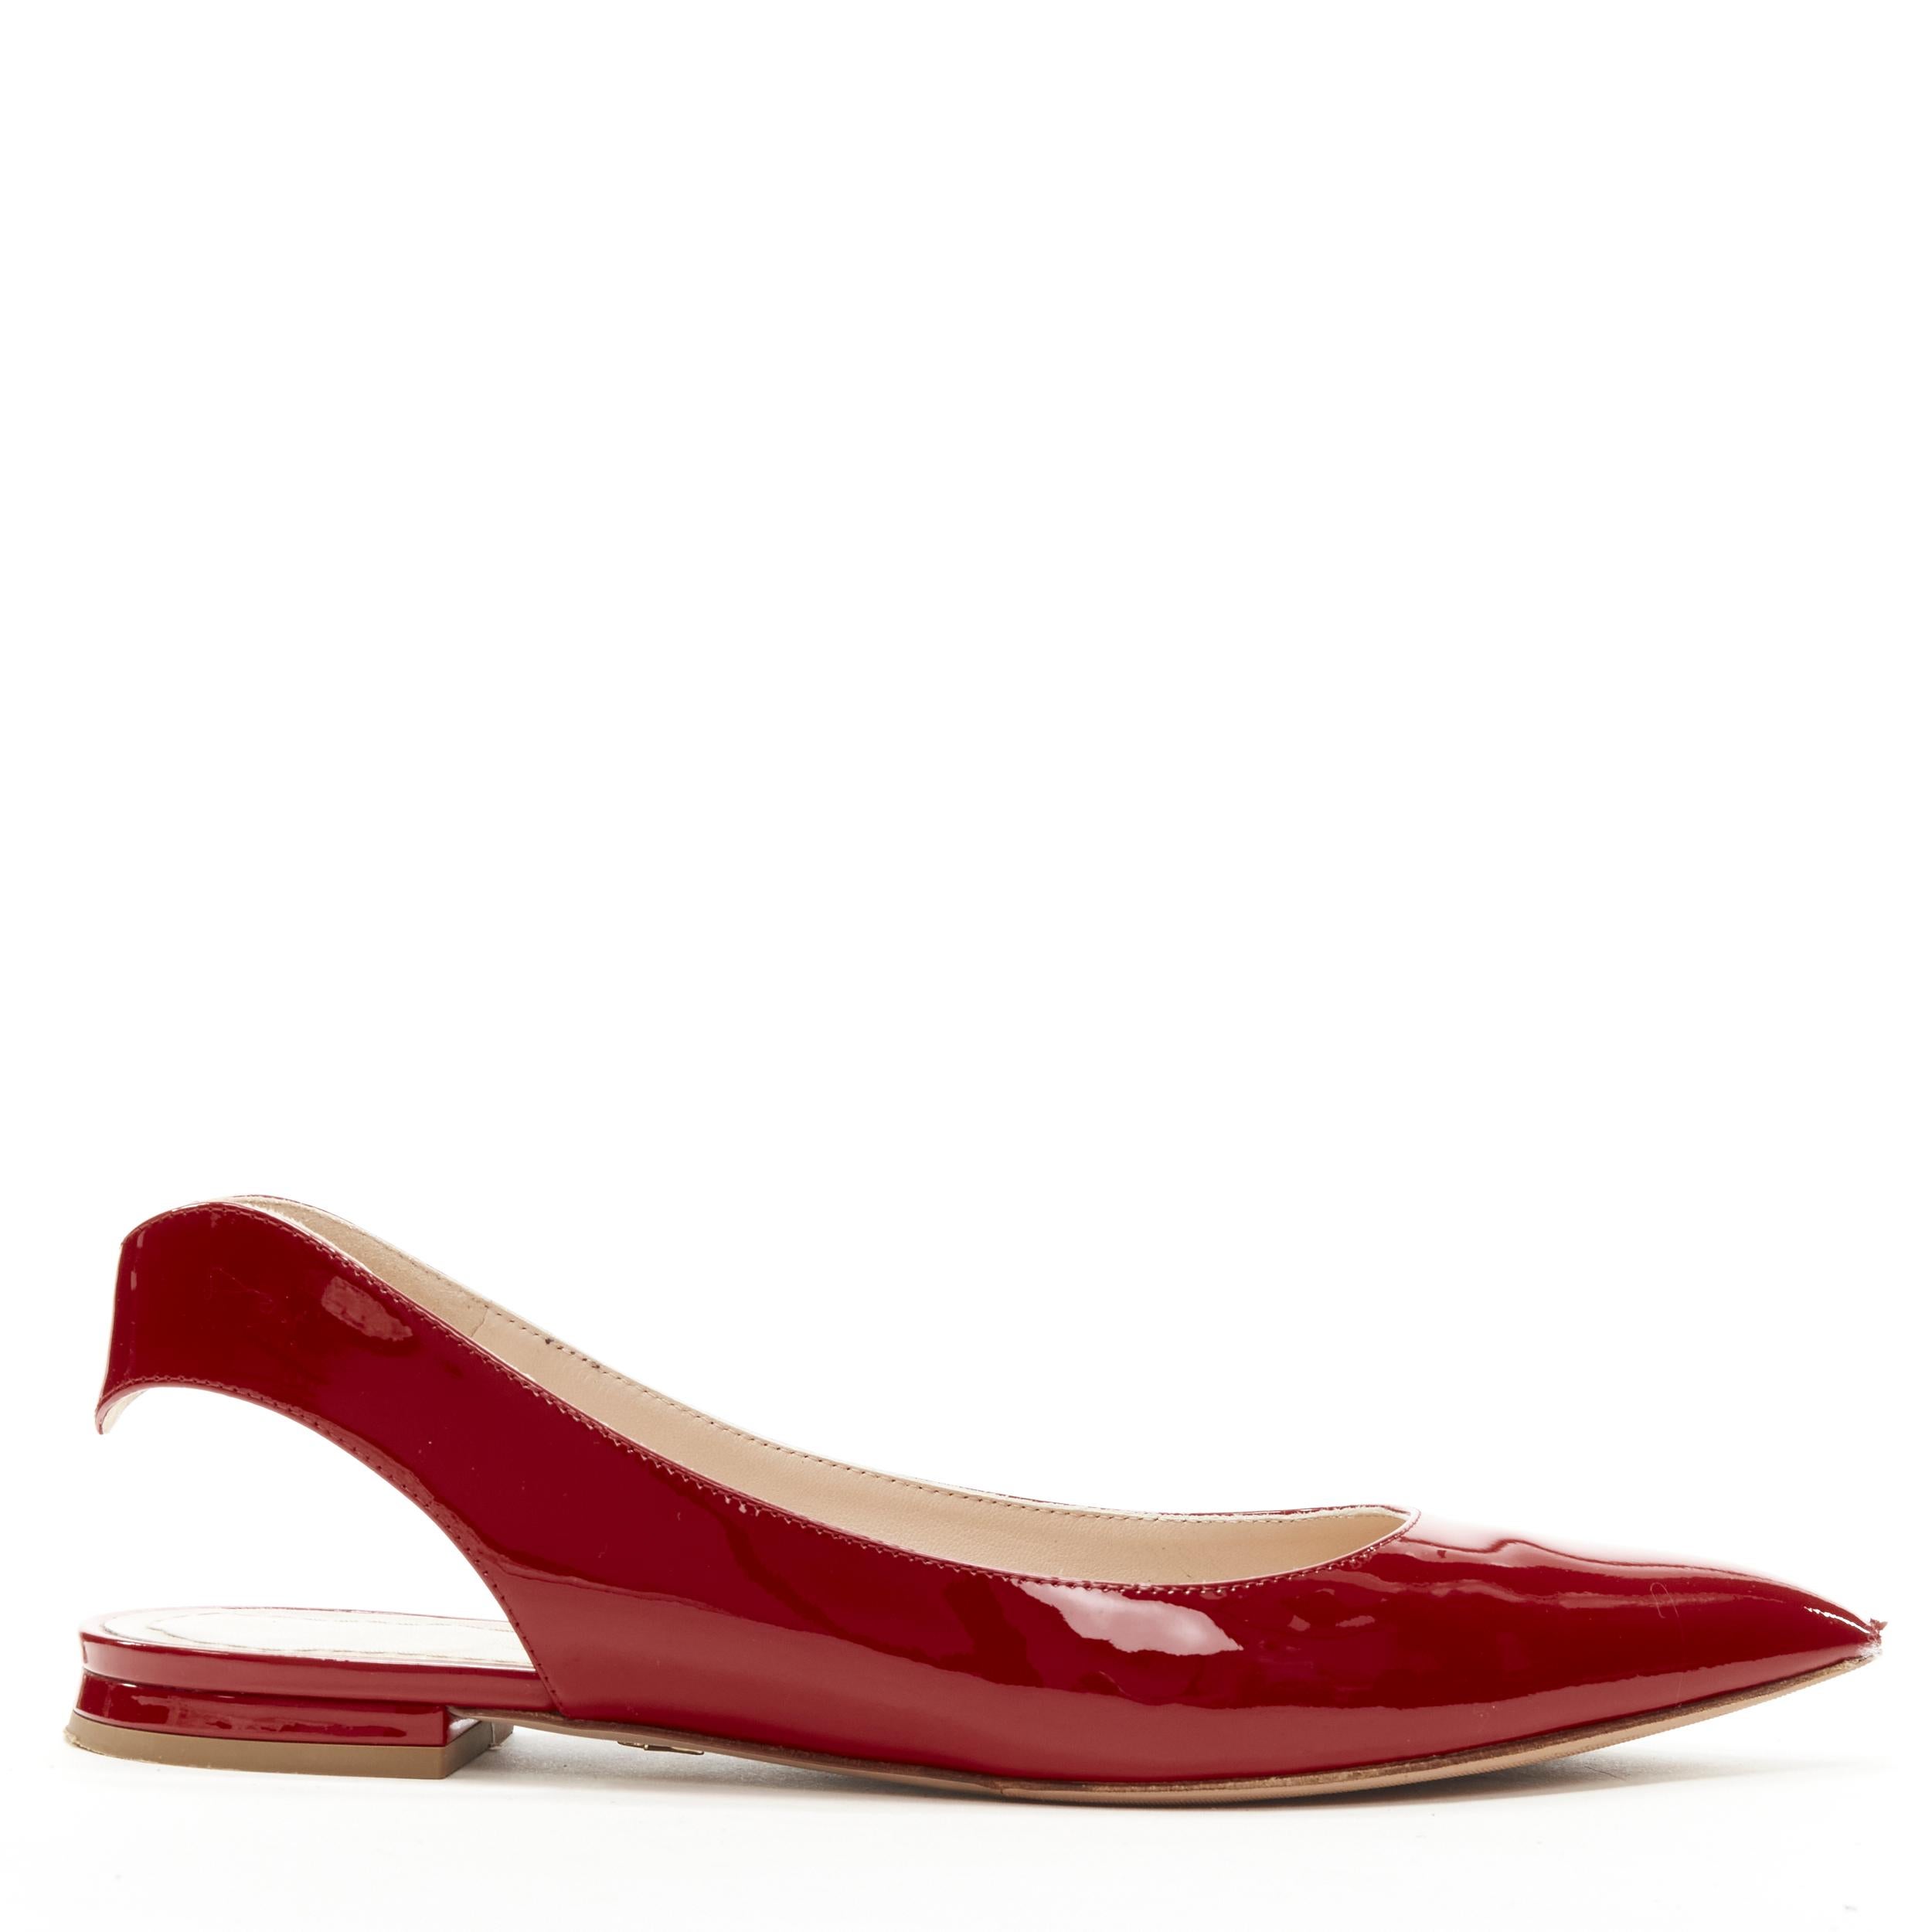 CHRISTIAN DIOR Obsesse-D red patent leather slingback pointy flats EU36.5 
Reference: ANWU/A00339 
Brand: Christian Dior 
Model: Obsesse-D 
Material: Patent Leather 
Color: Red 
Pattern: Solid 
Extra Detail: Red patent. Curved dipped slingback heel.